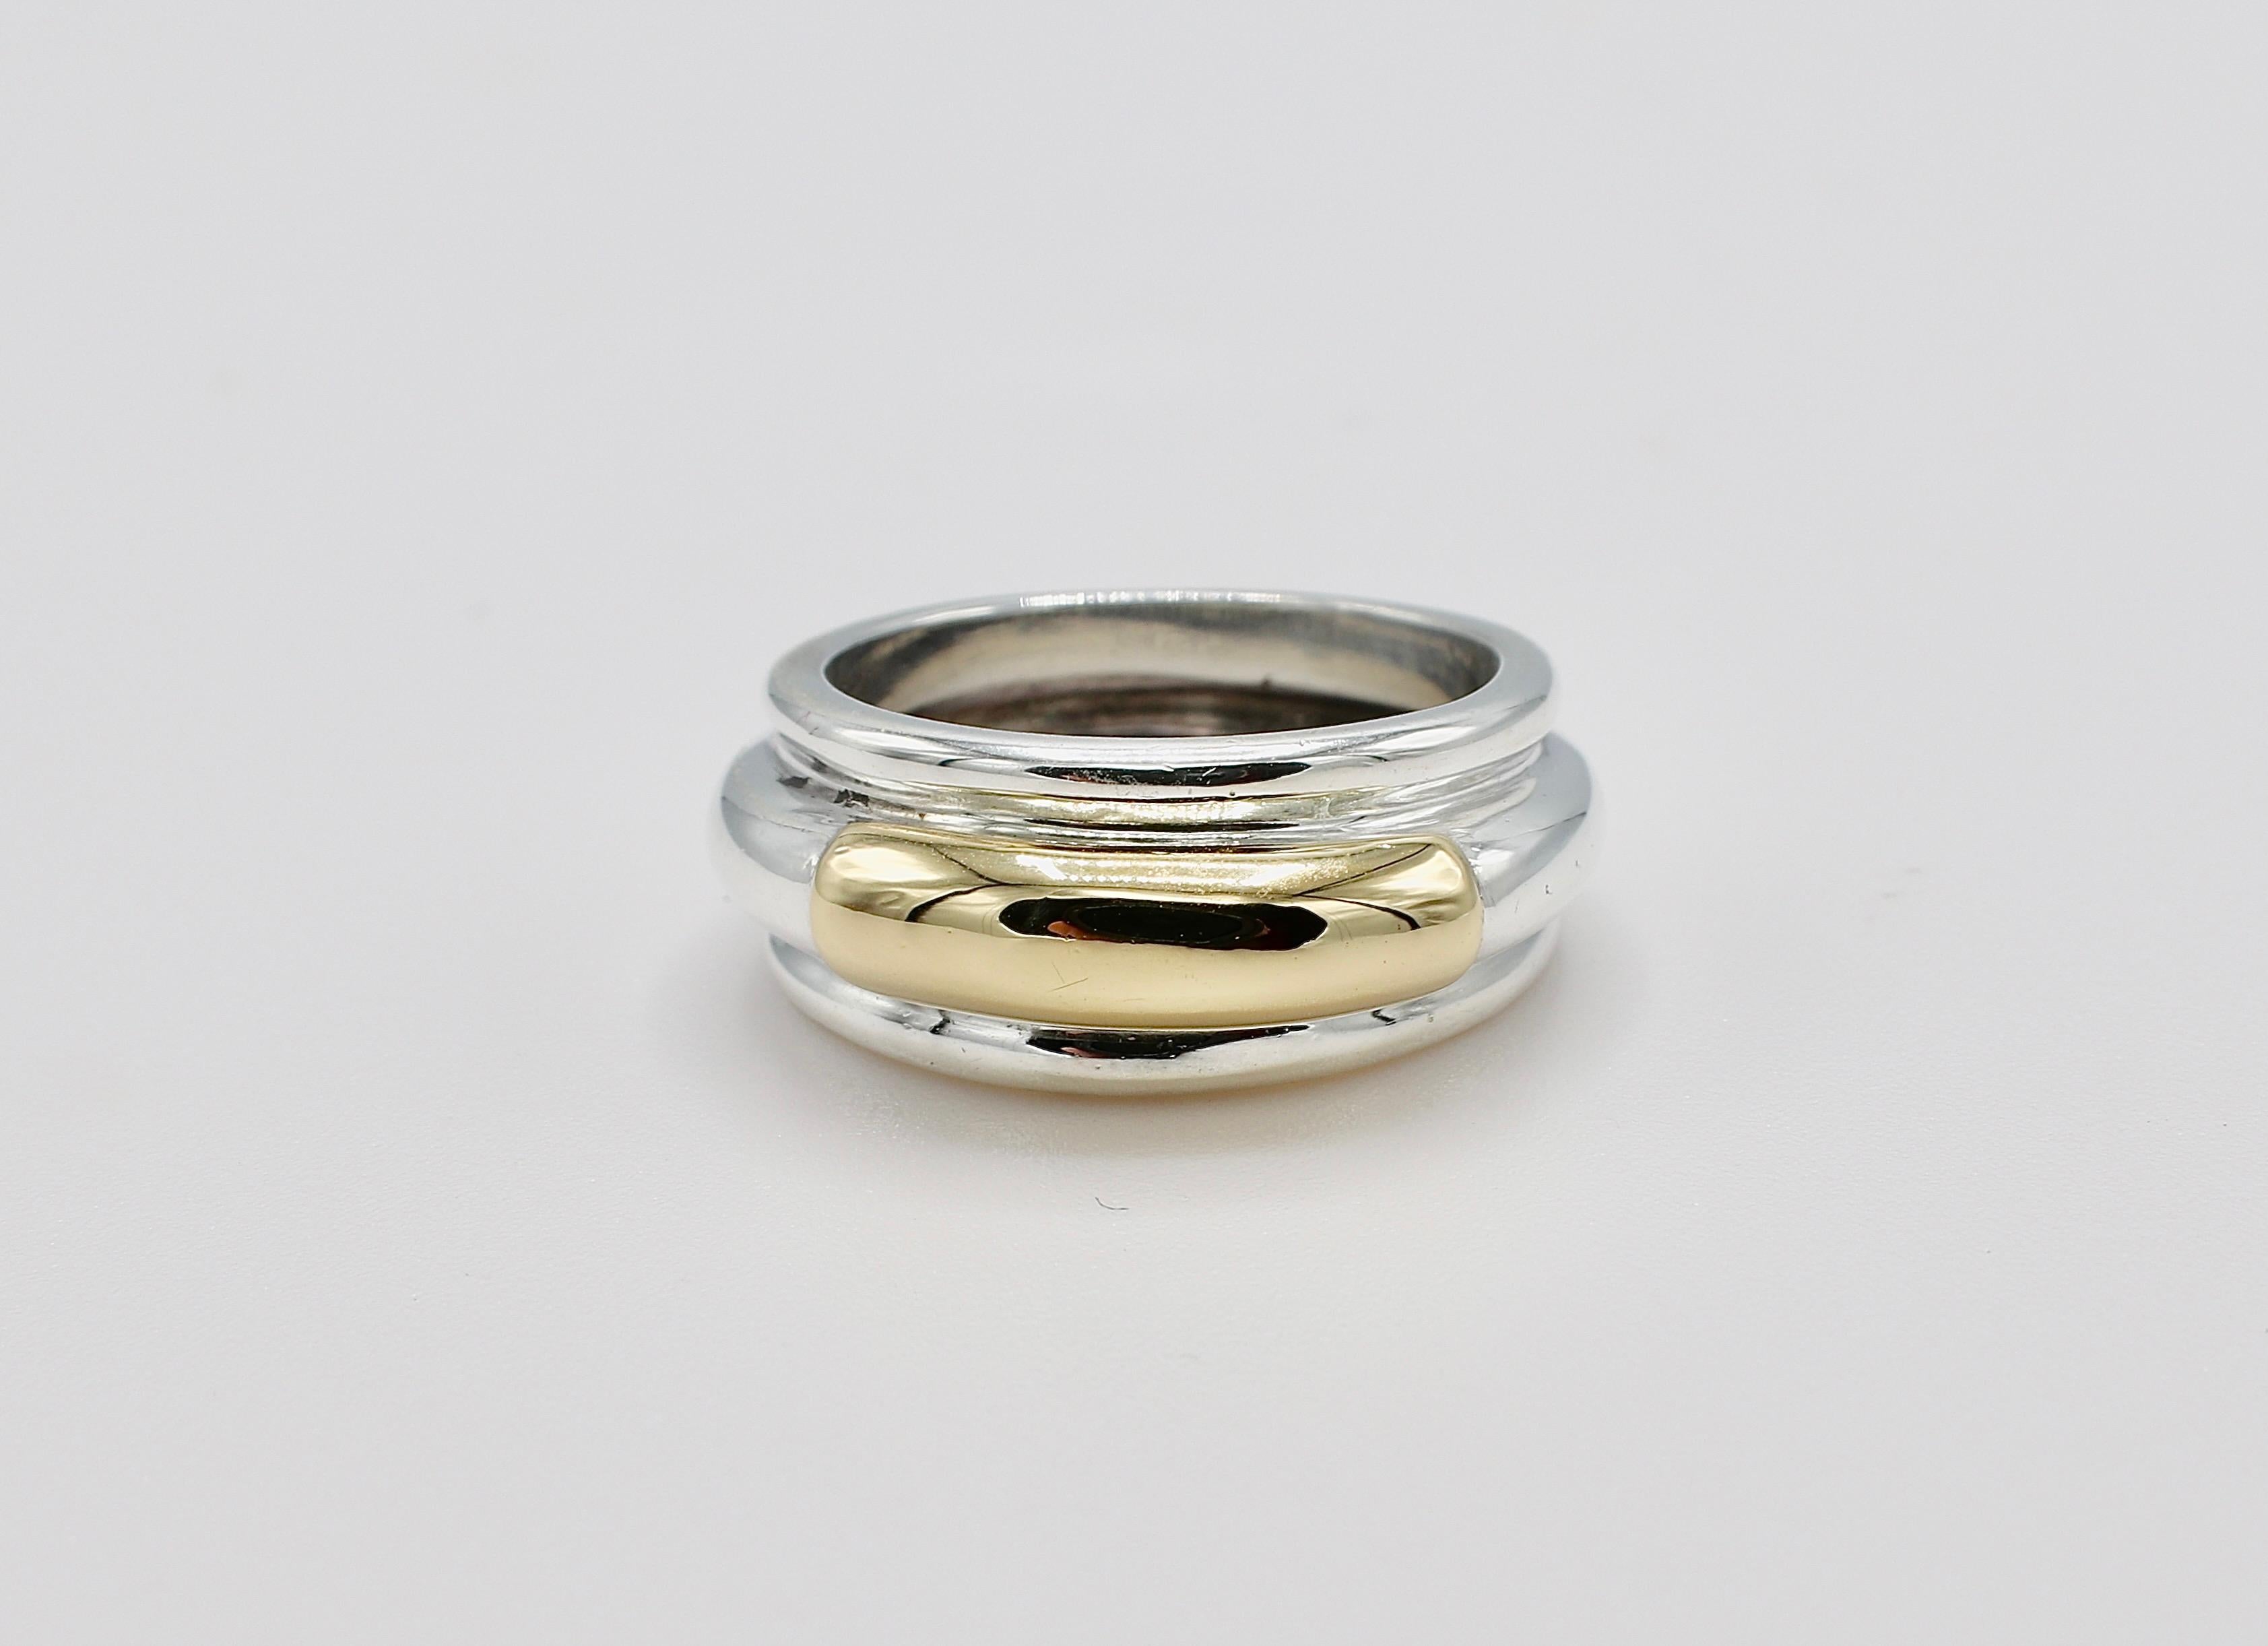 Ilias Lalaounis Sterling Silver & Gold Band Ring Size 6

Metal: Sterling silver & 18k gold
Weight: 6.89 grams
Width: 5.5 - 8.5mm
Size: 6 (US)